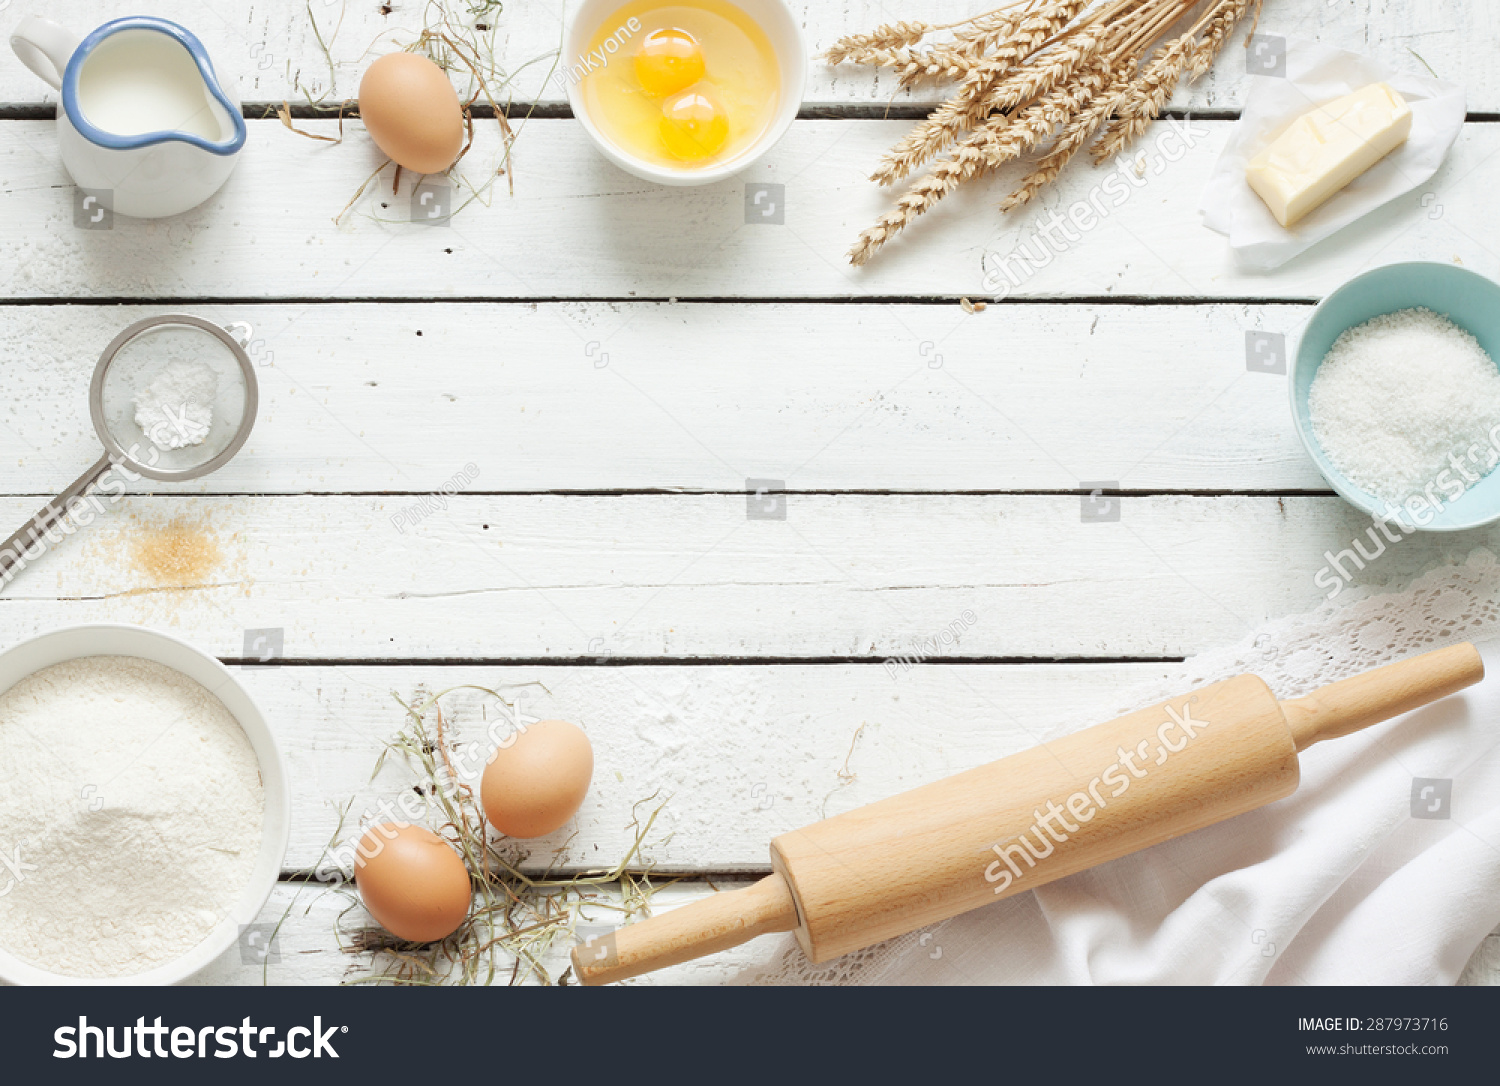 Baking cake in rustic kitchen - dough recipe ingredients (eggs, flour, milk, butter, sugar) on white planked wooden table from above. Background layout with free text space. #287973716